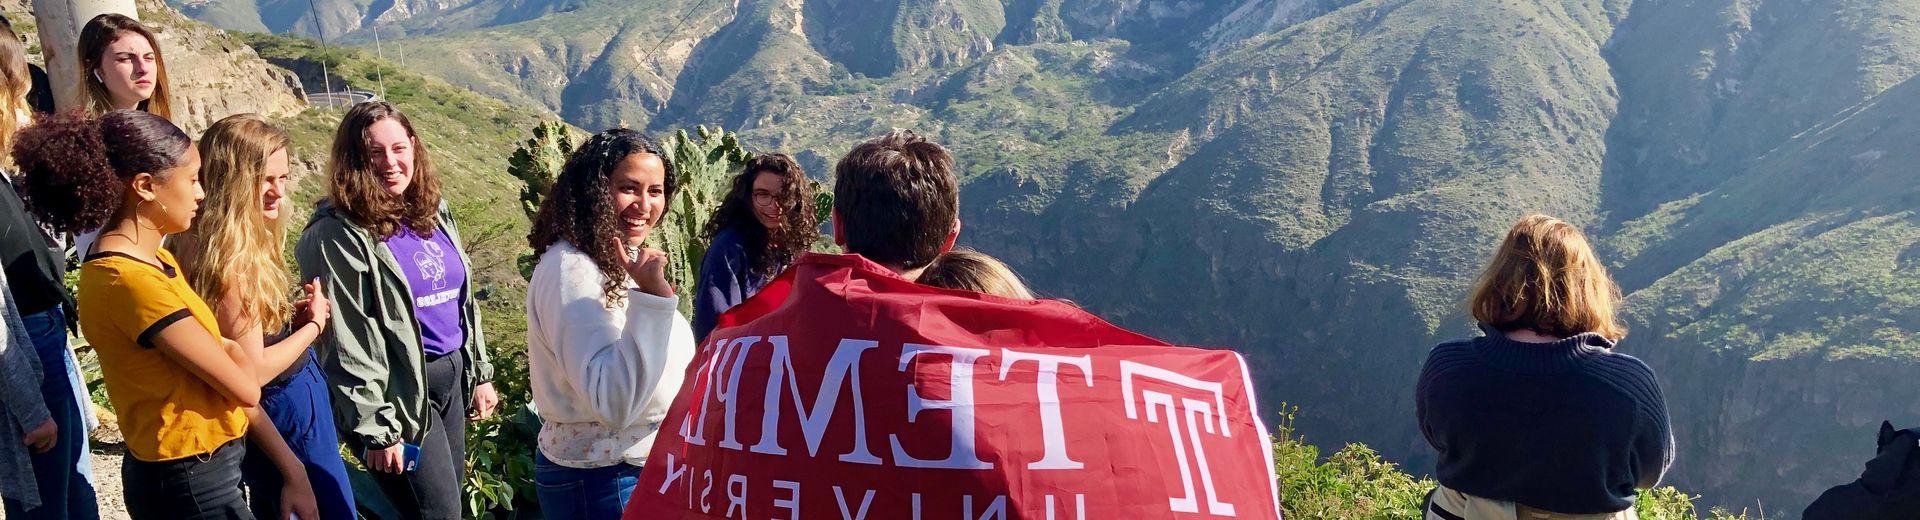 Students on top of a mountain carrying a cherry red Temple flag